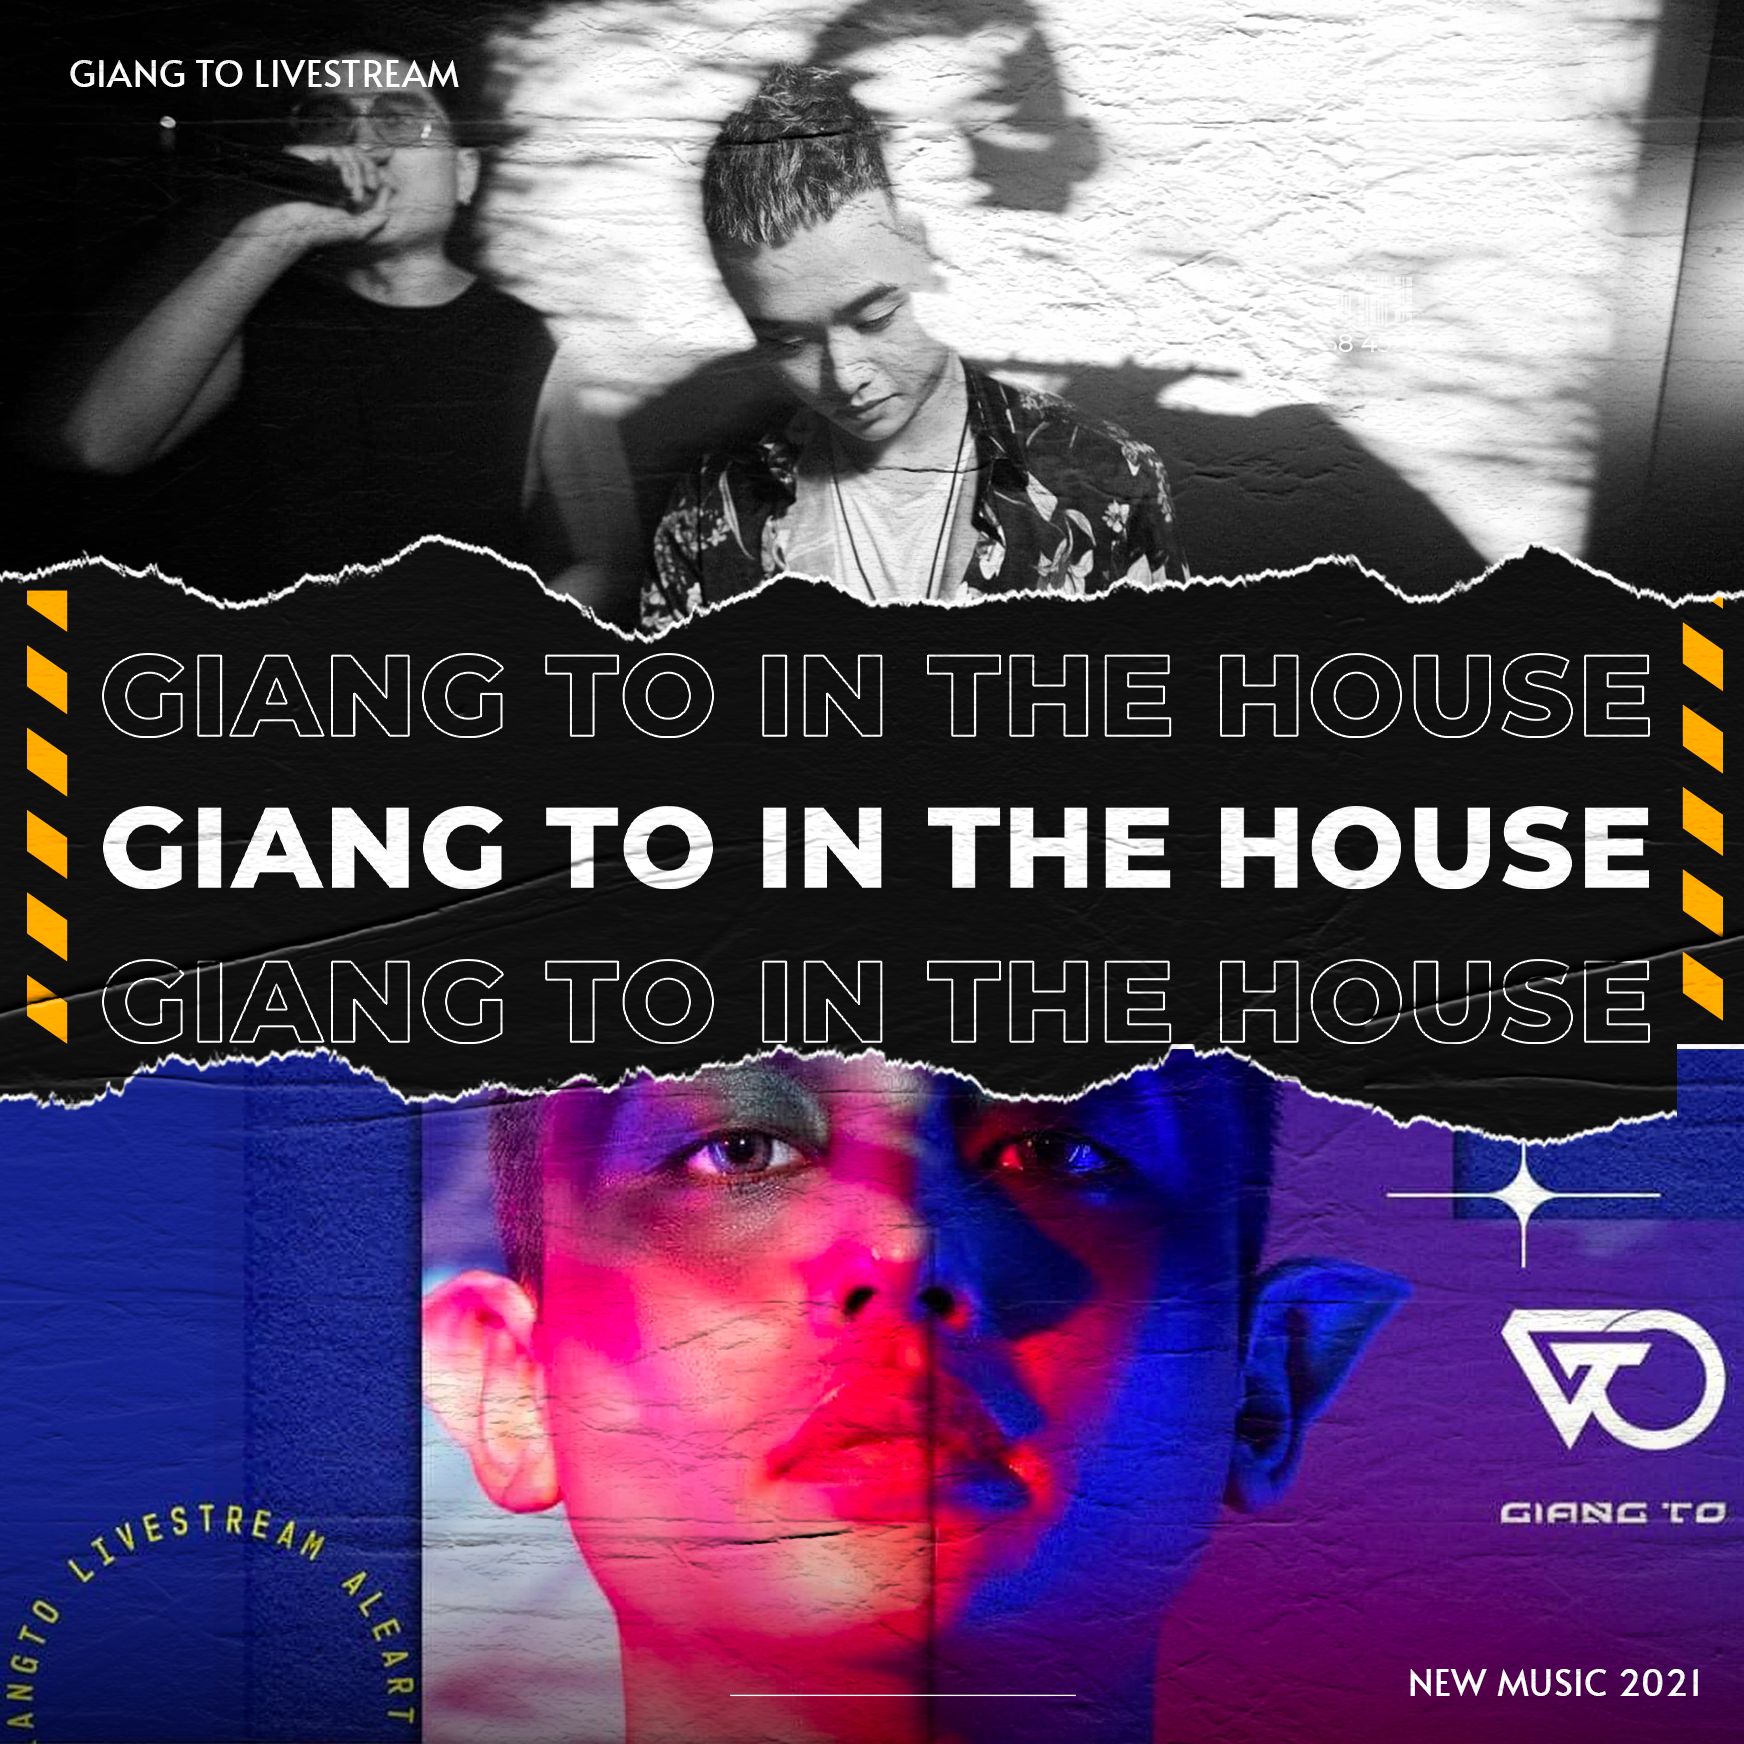 Parsisiųsti Giang To In The House - 2021